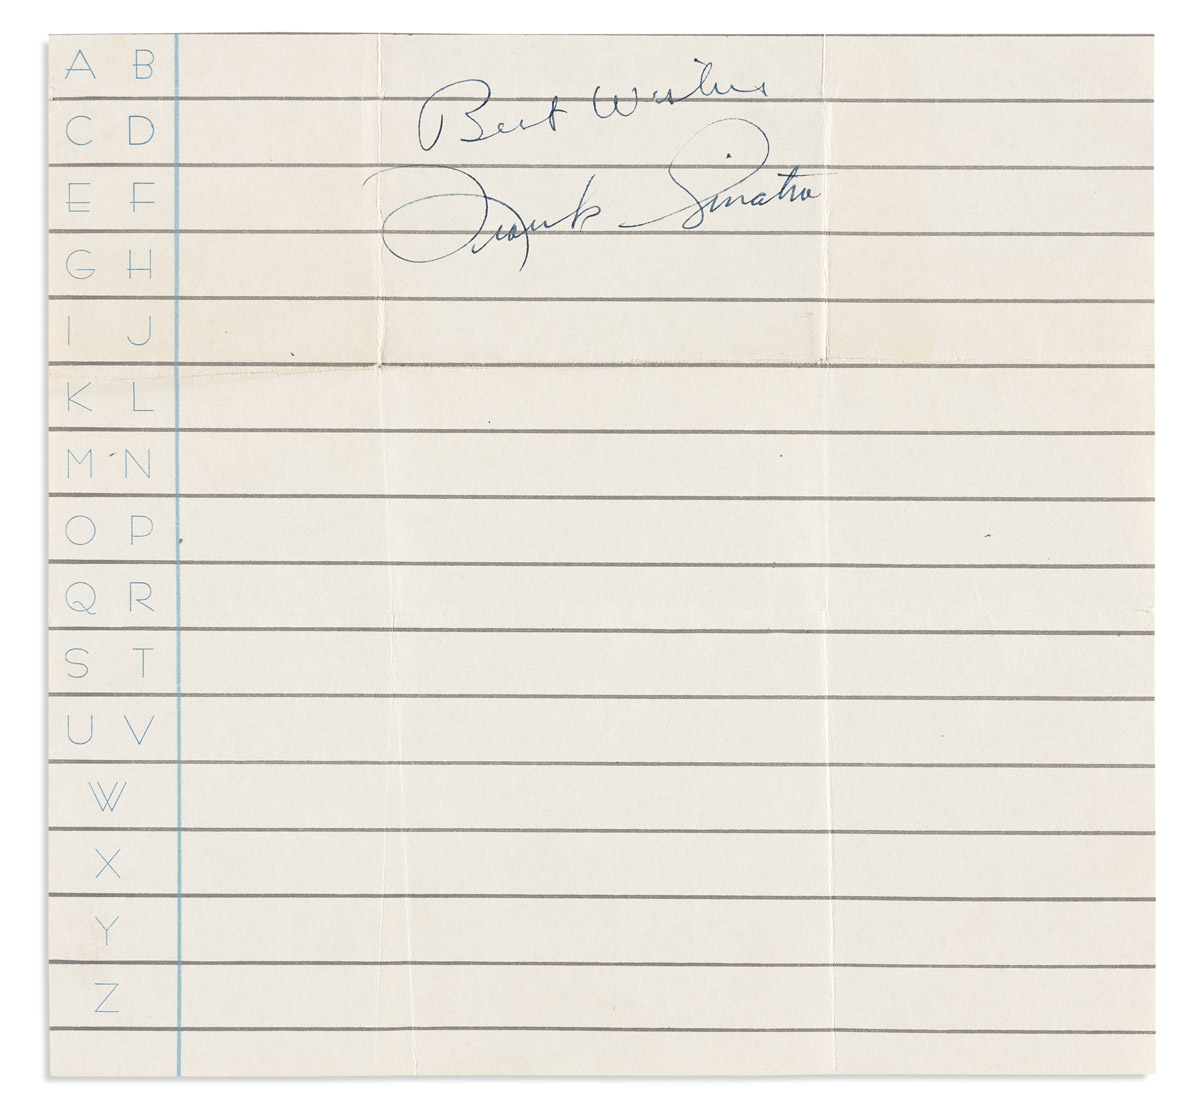 SINATRA, FRANK. Signature, on a slip of paper: Best Wishes / Frank Sinatra.